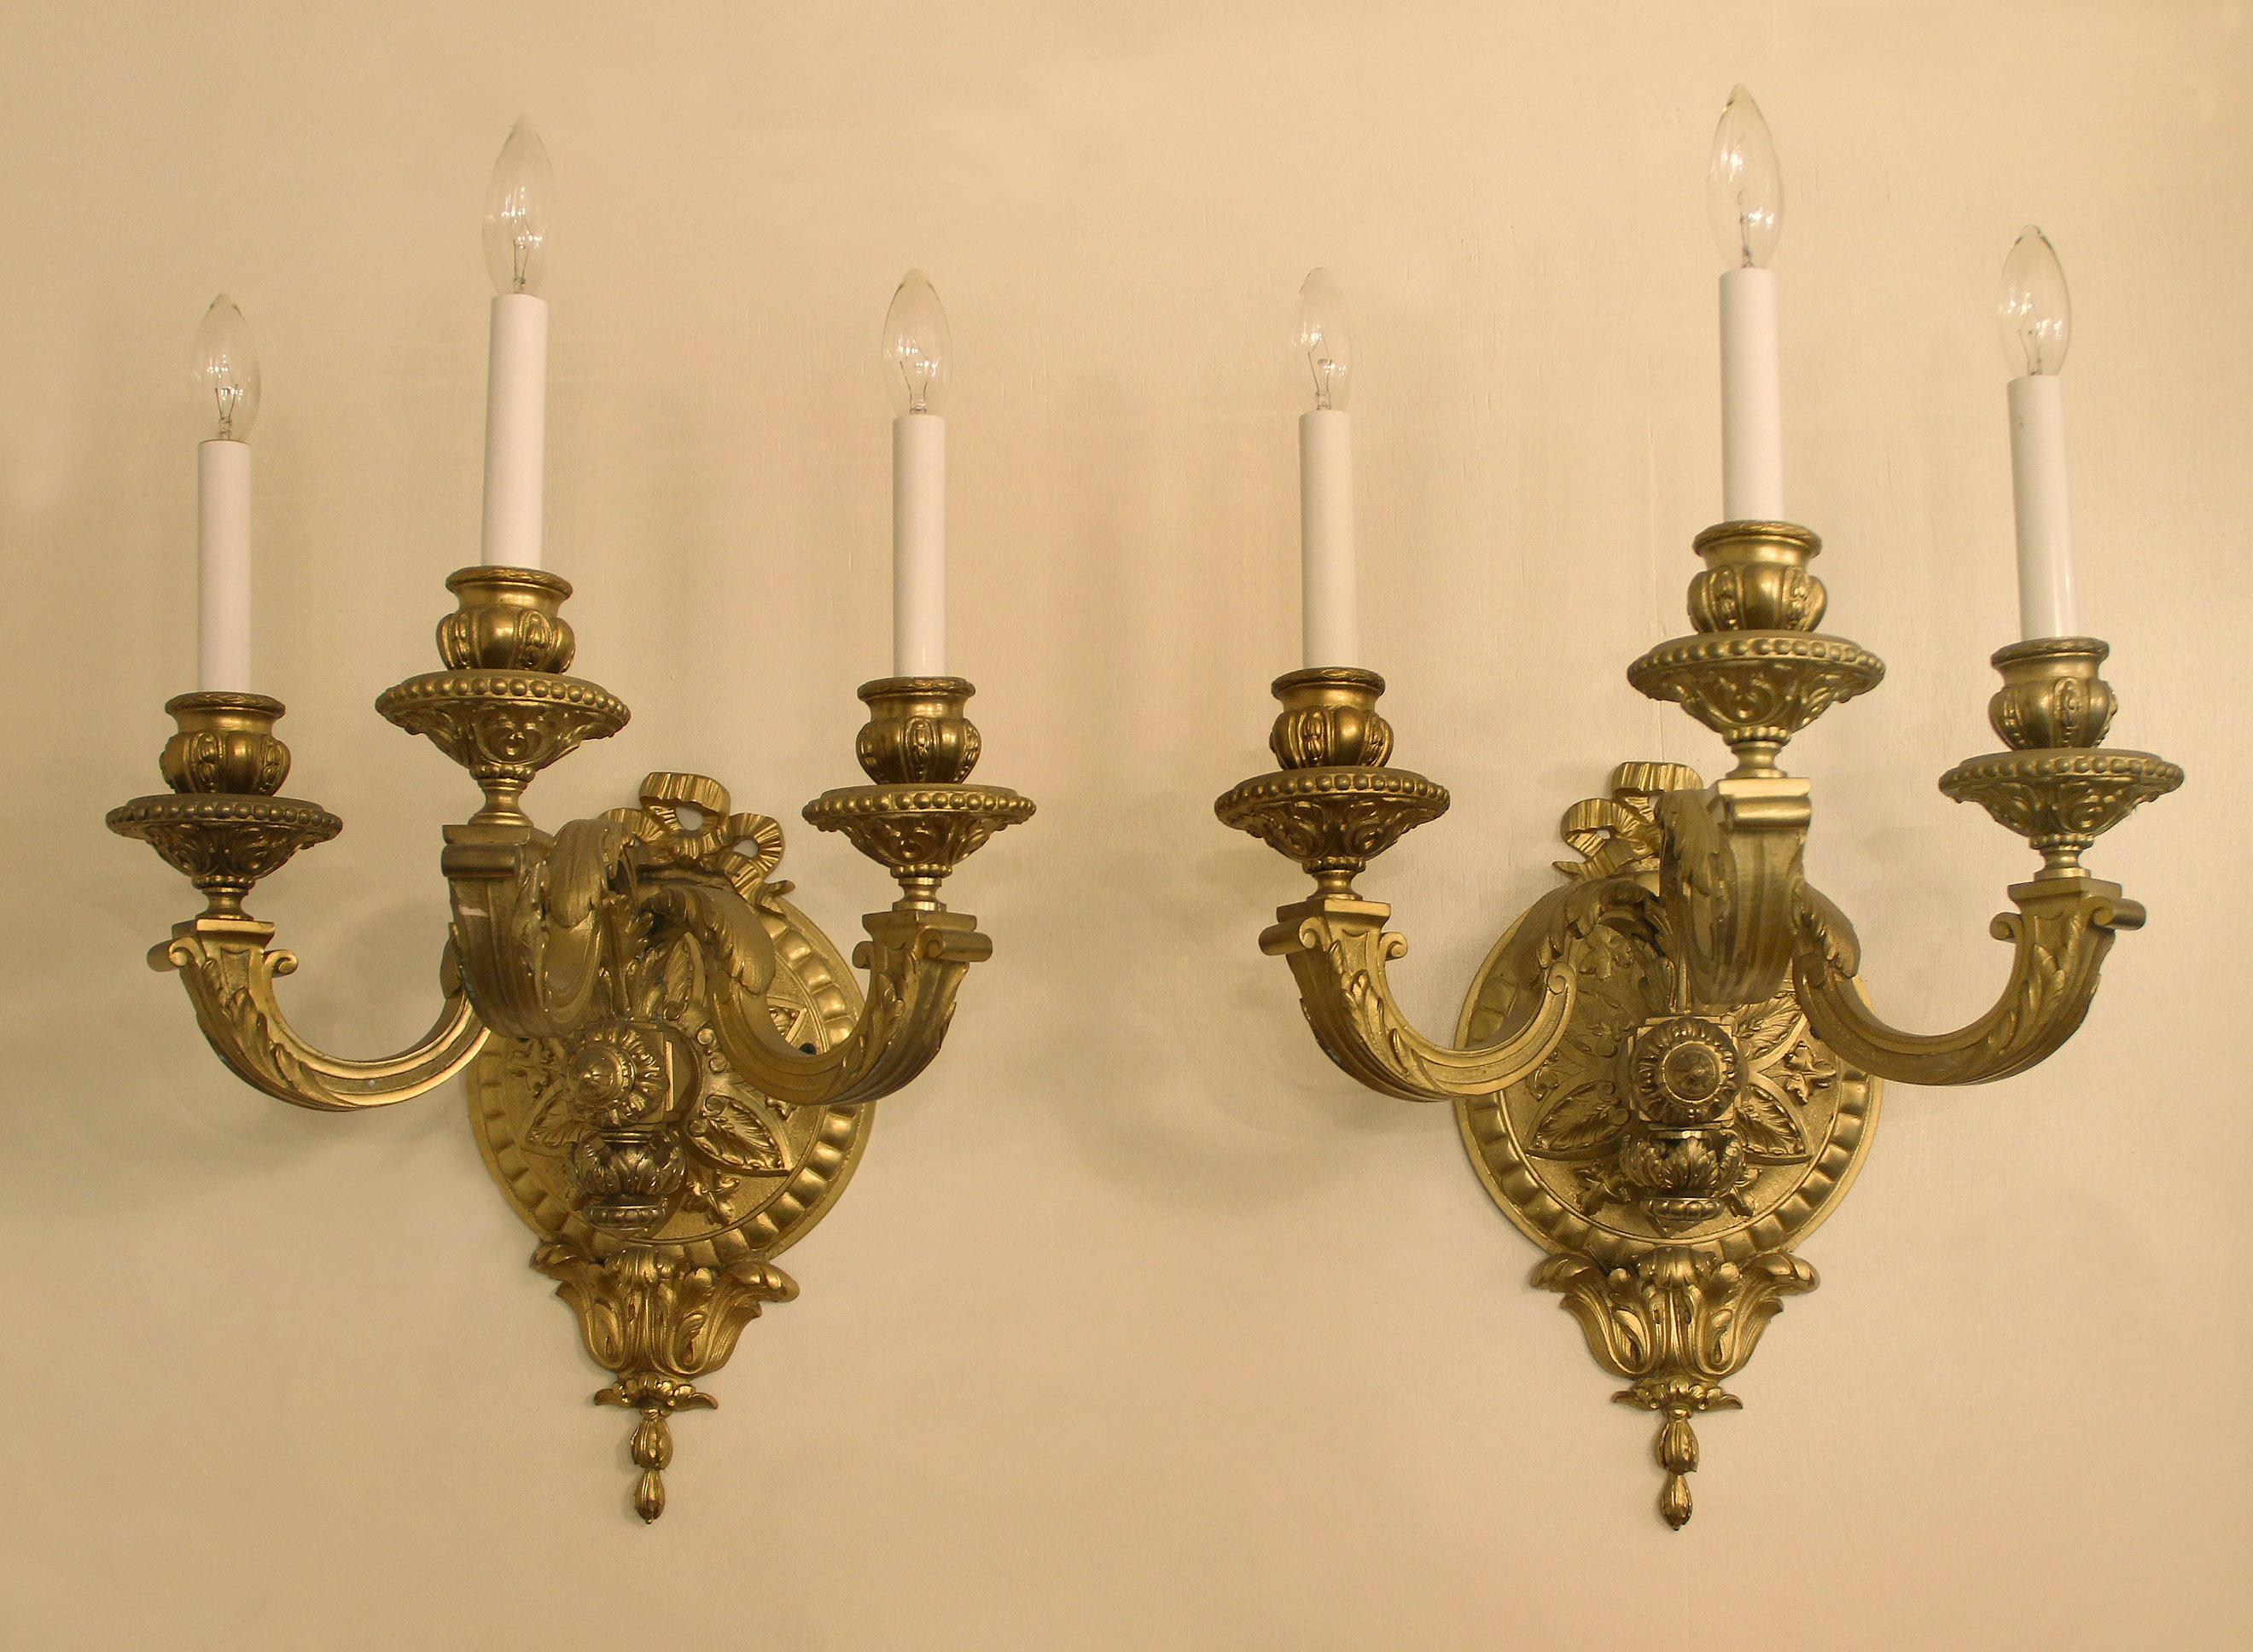 A Nice Pair of late 19th century gilt bronze three light sconces.

Each decorated with a bow above a circular backplate centered with a star and floral design and three “S” shaped arms.